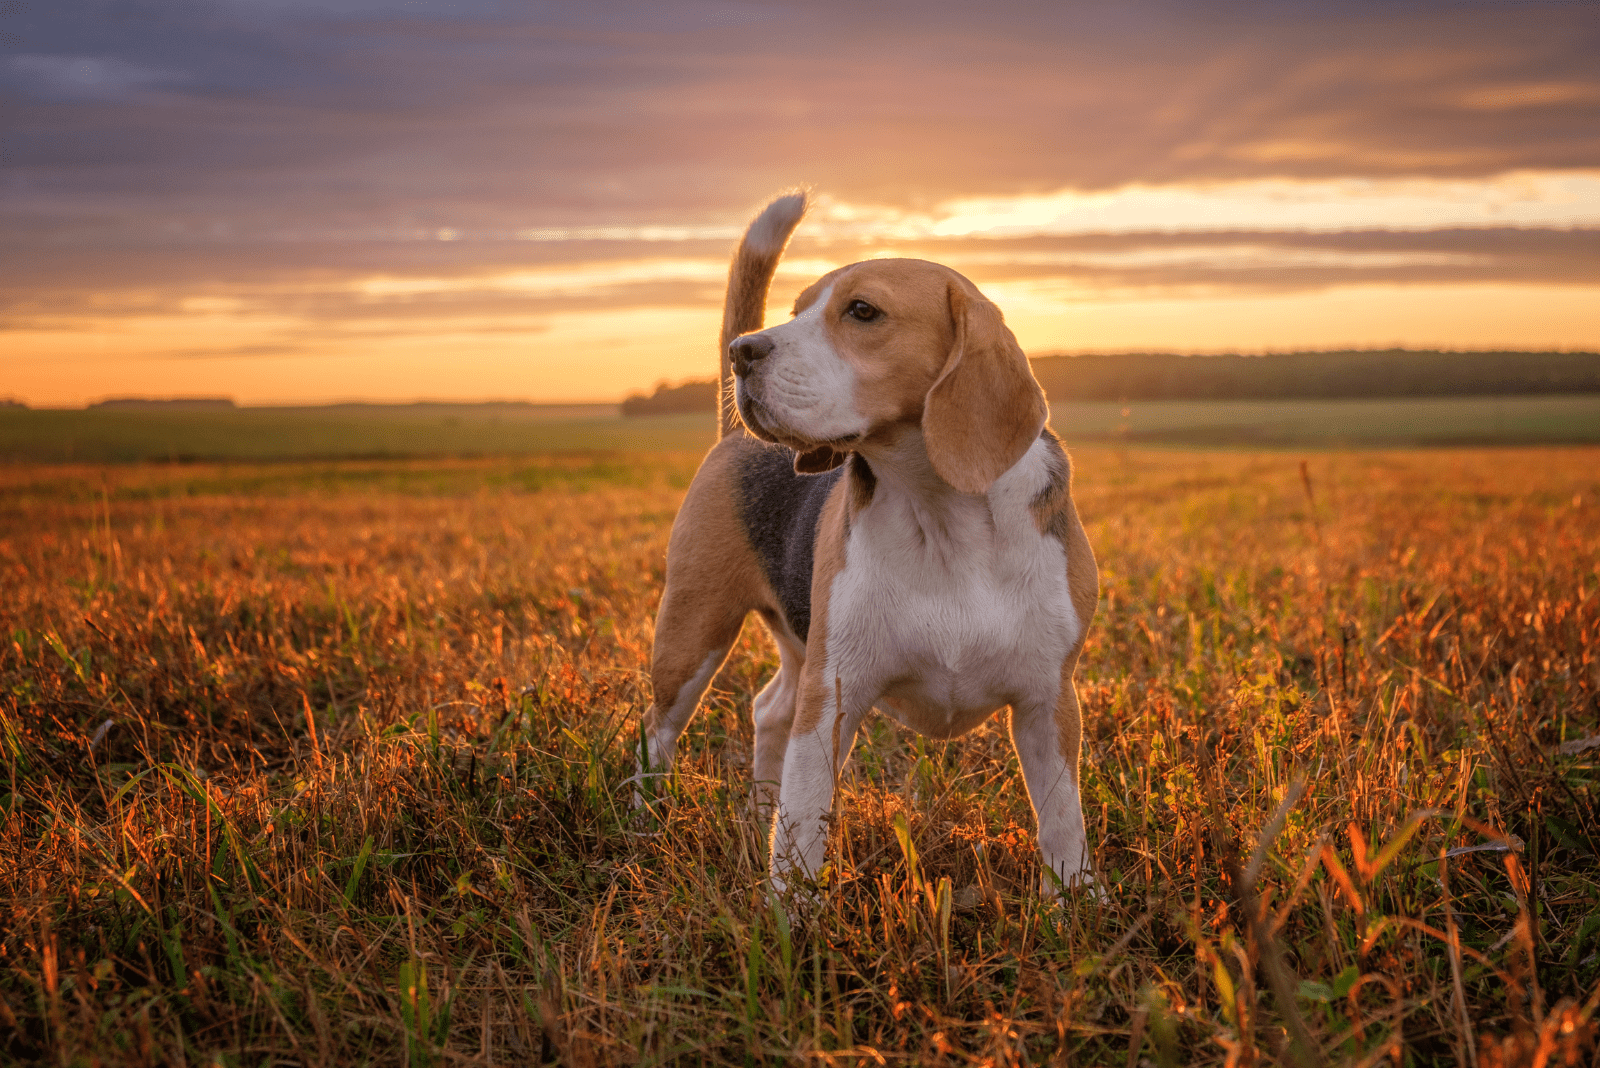 A beagle is standing in a field